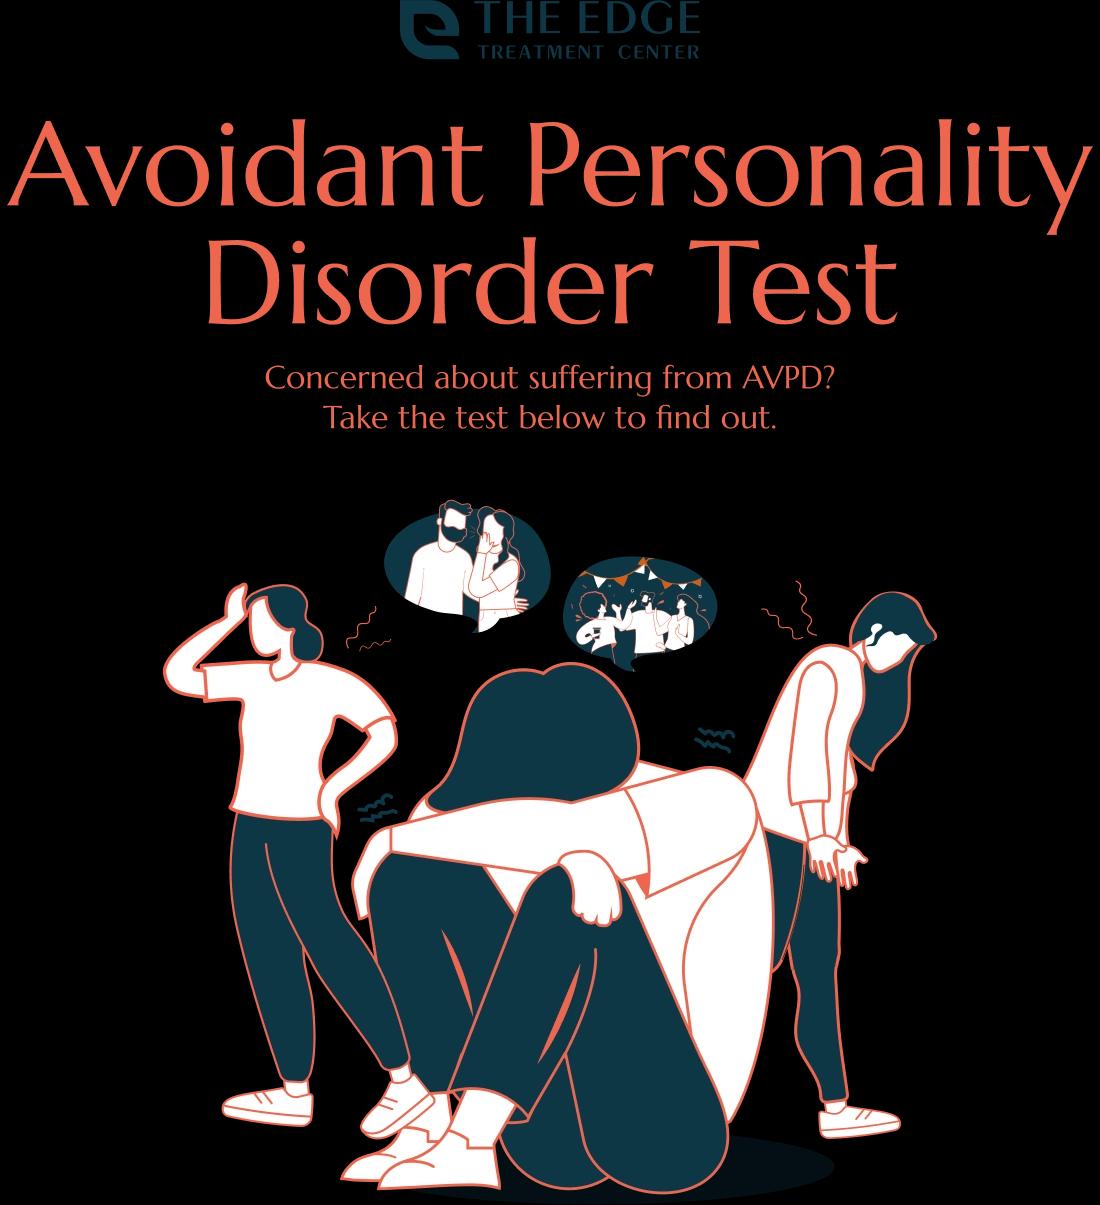 avoidant-personality-disorder-test-cover-image